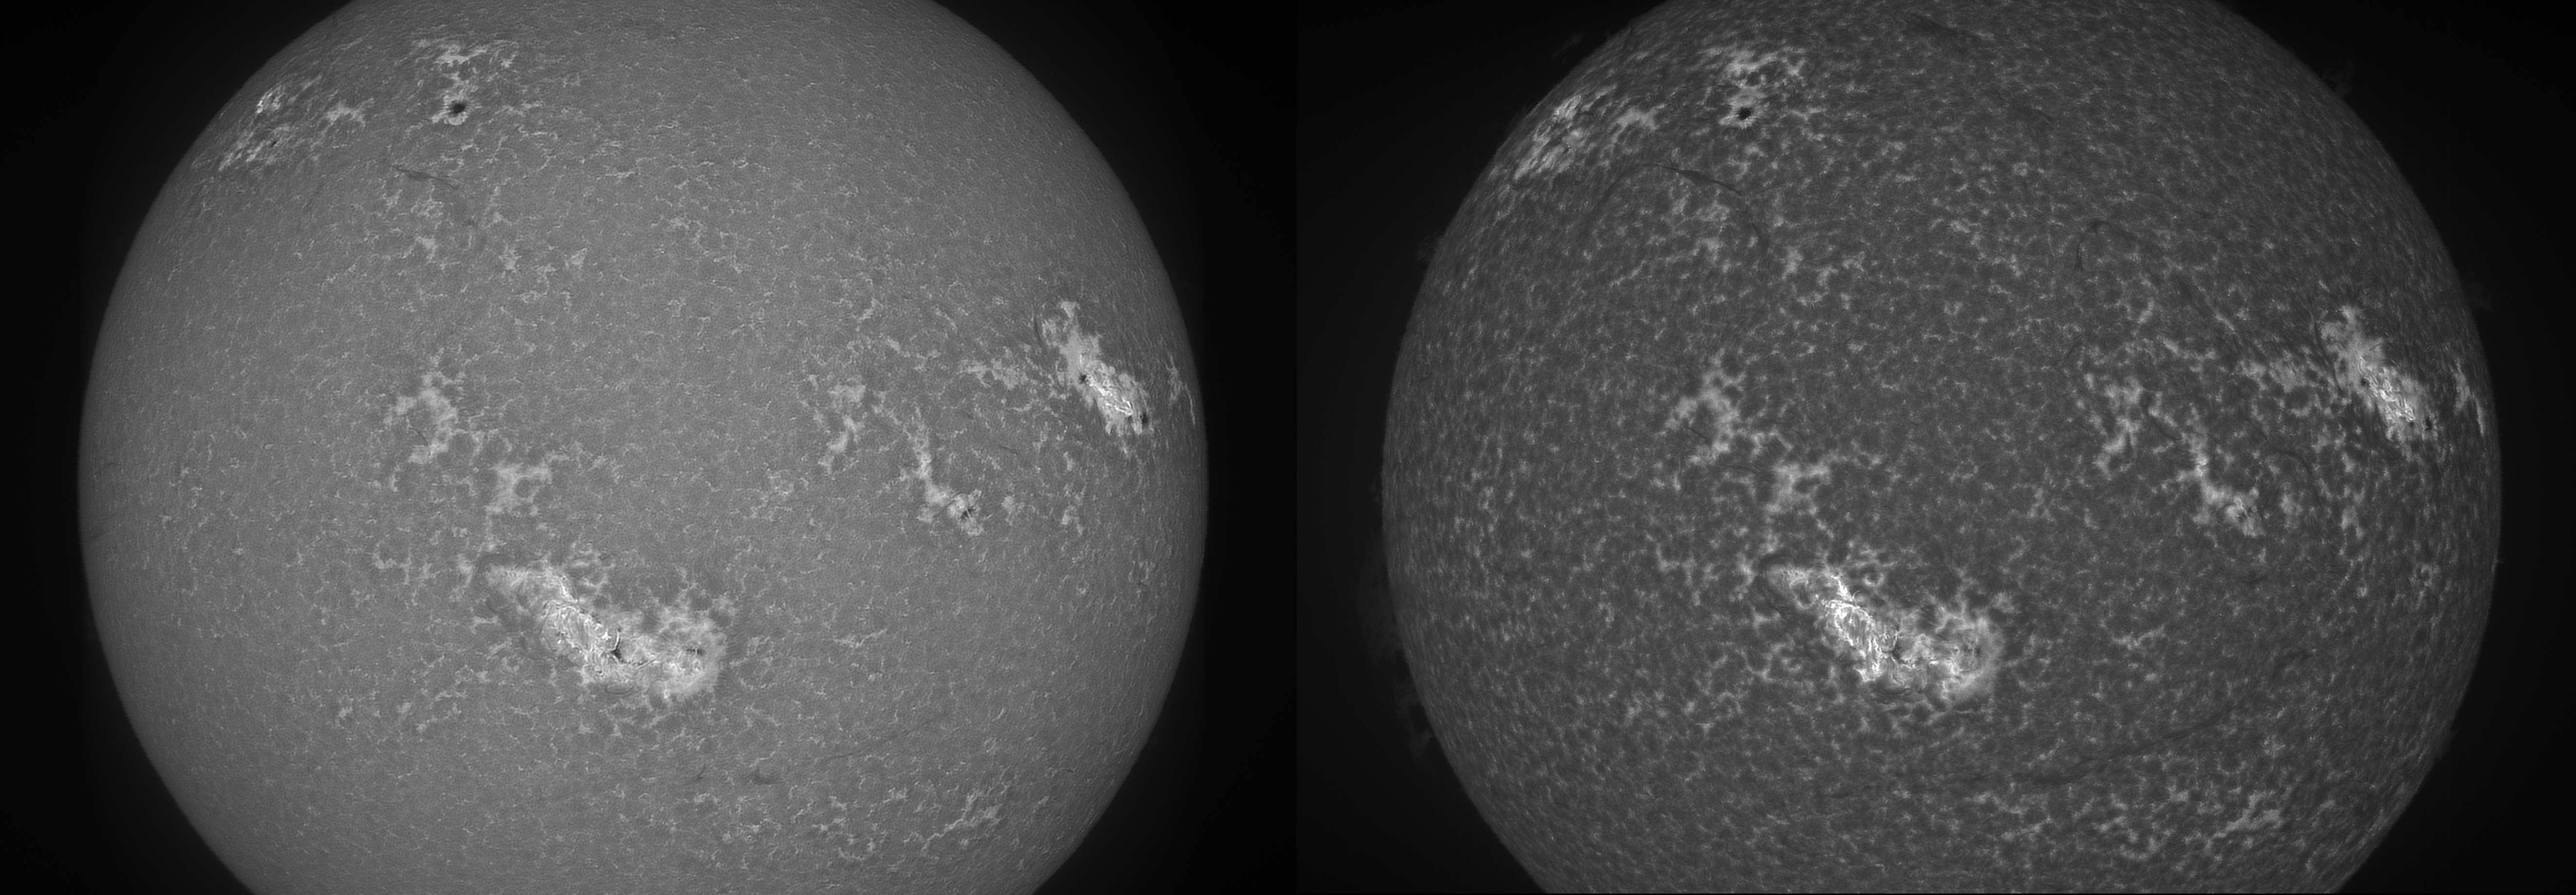 Left: Calcium 854.2 nm with Skywatcher 80ED (80mm aperture, 600mm focal length). Exposure 4.0ms, gain 50 (9%), 241fps. IMX 178 camera. Stack of 23 frames. Right: Calcium 396.8 nm with APO triplet (72mm aperture, 720mm focal length). 3.0ms exposure, gain 50 (11%), 318fps. IMX 183 camera. Stack of 17 frames.